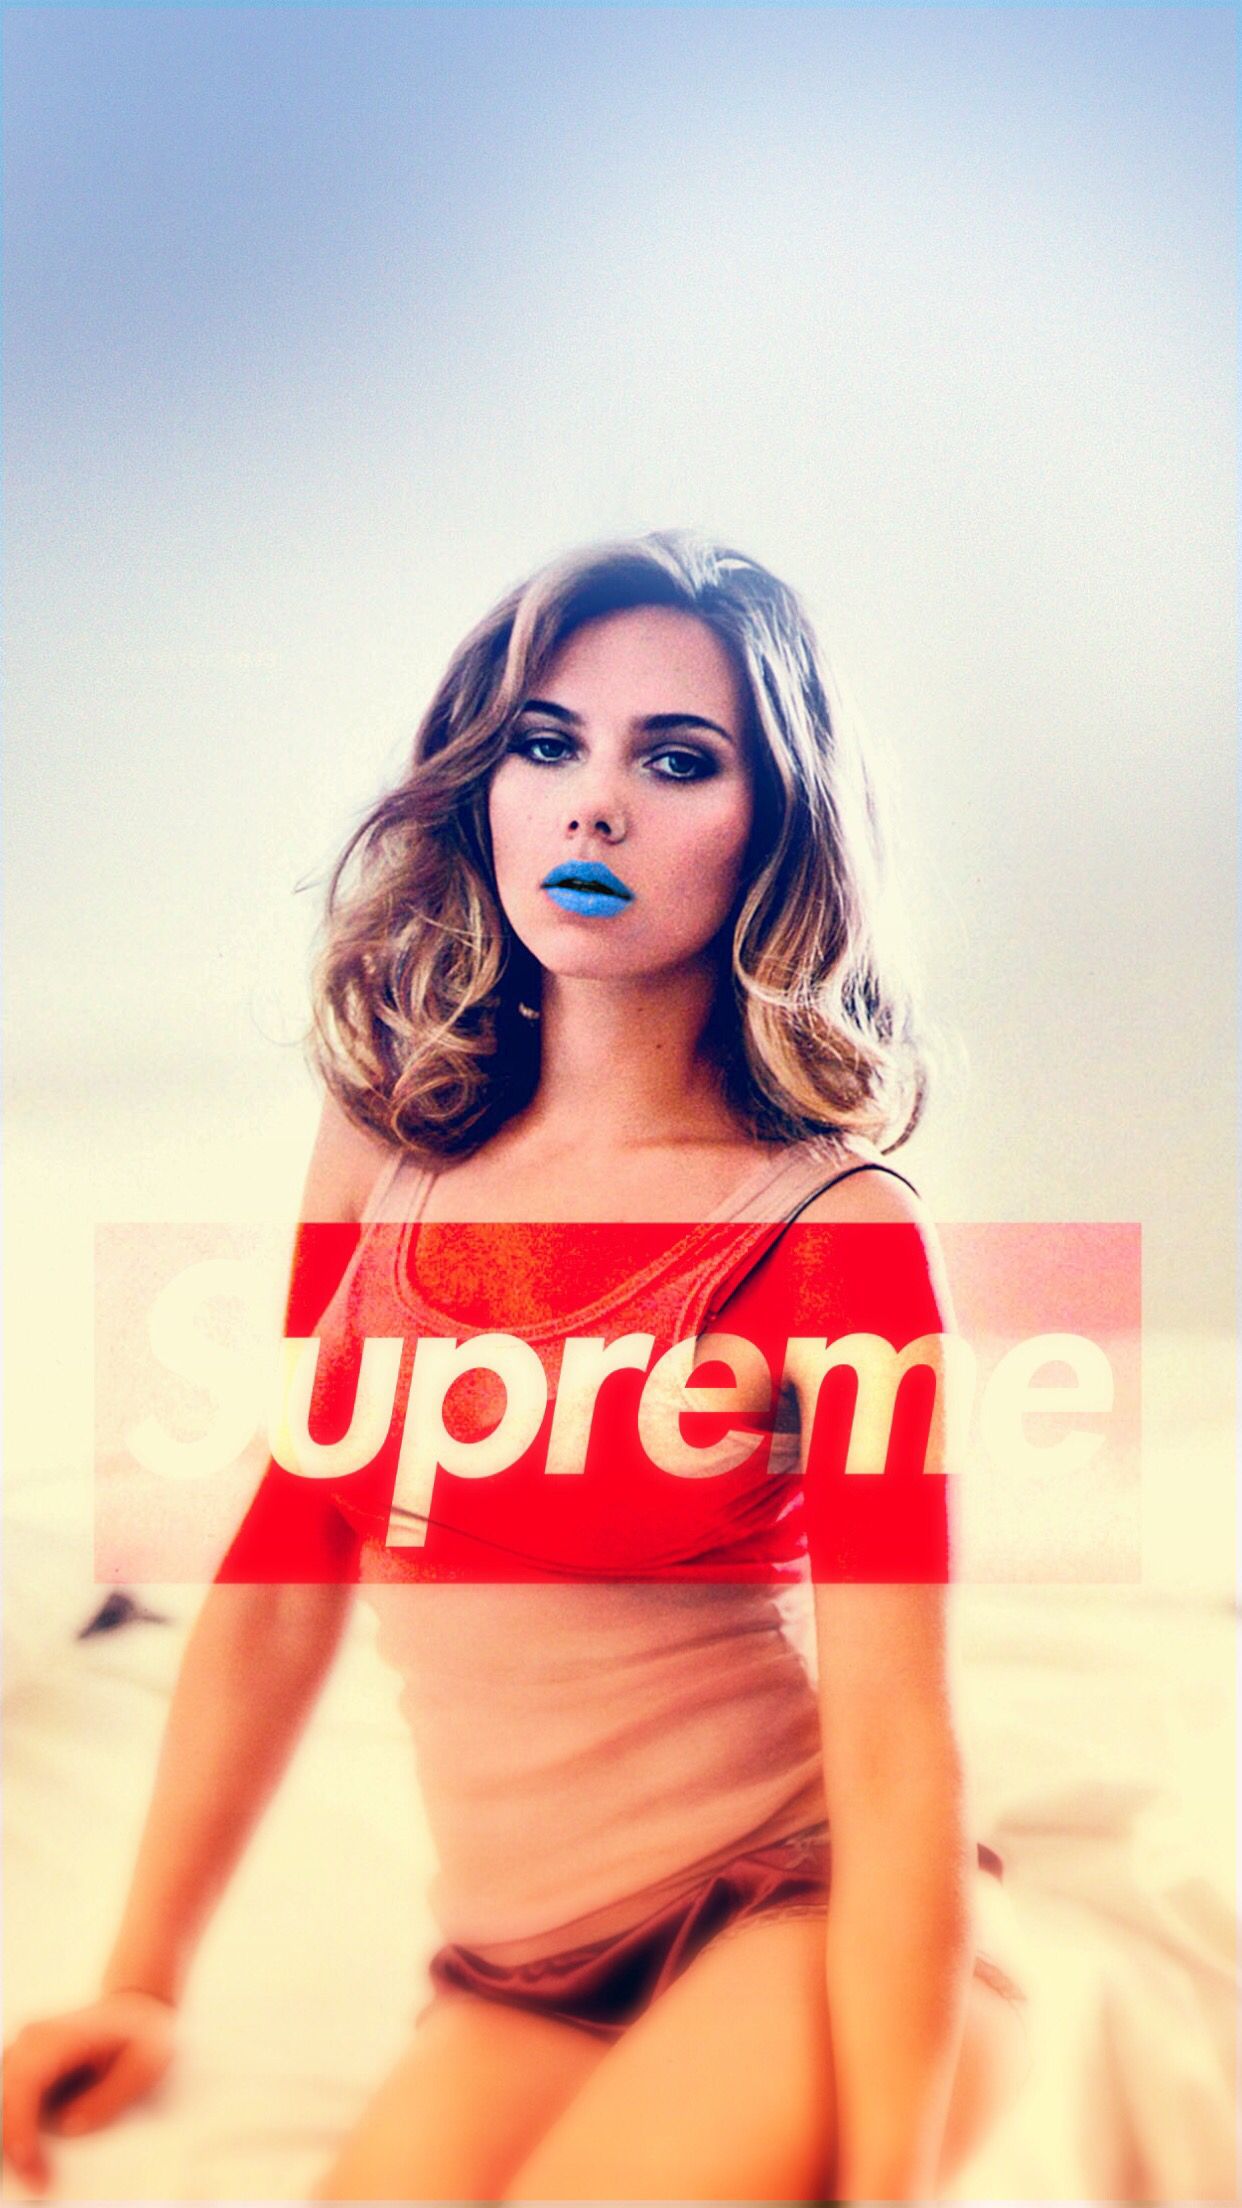 Free Download Wallpaper Supreme Sexy Hypebeast Wallpapers In 19 Supreme 1242x28 For Your Desktop Mobile Tablet Explore 46 Model Supreme Iphone Wallpaper Model Supreme Iphone Wallpaper Supreme Iphone Wallpapers Supreme Iphone Wallpaper